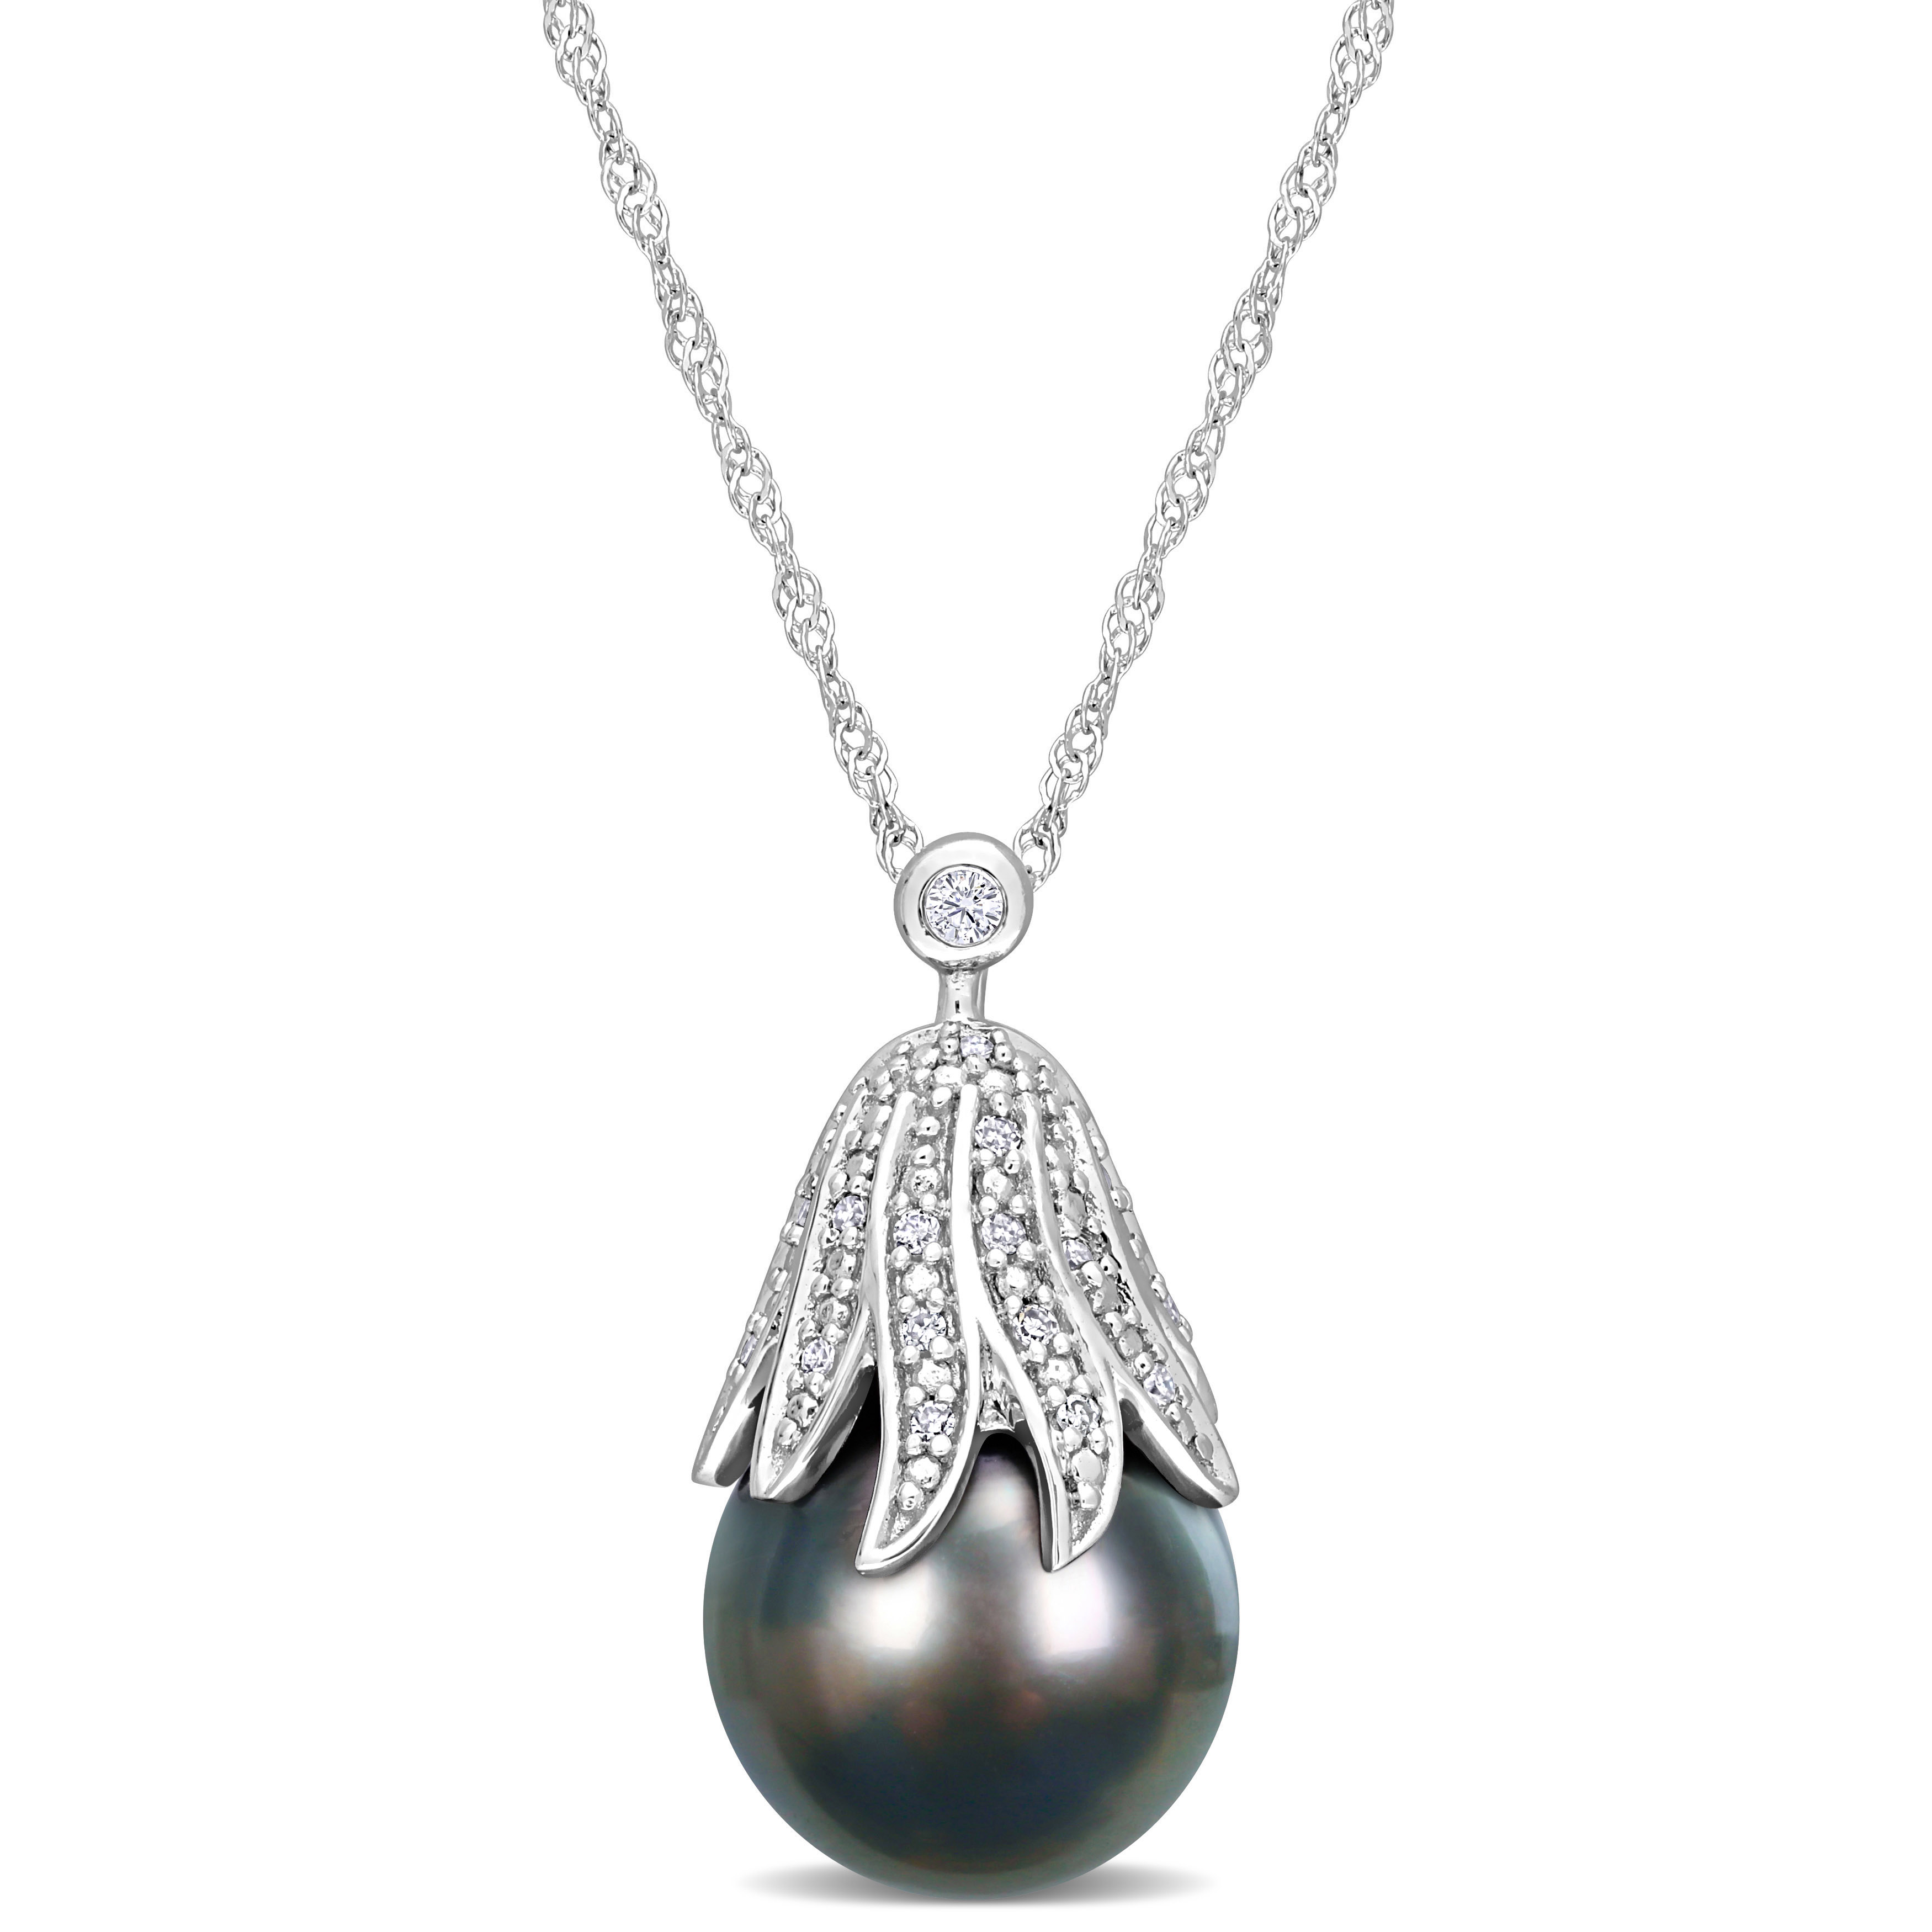 10-11 MM Black Tahitian Cultured Pearl & Diamond Accent Pendant with Chain in 14k White Gold